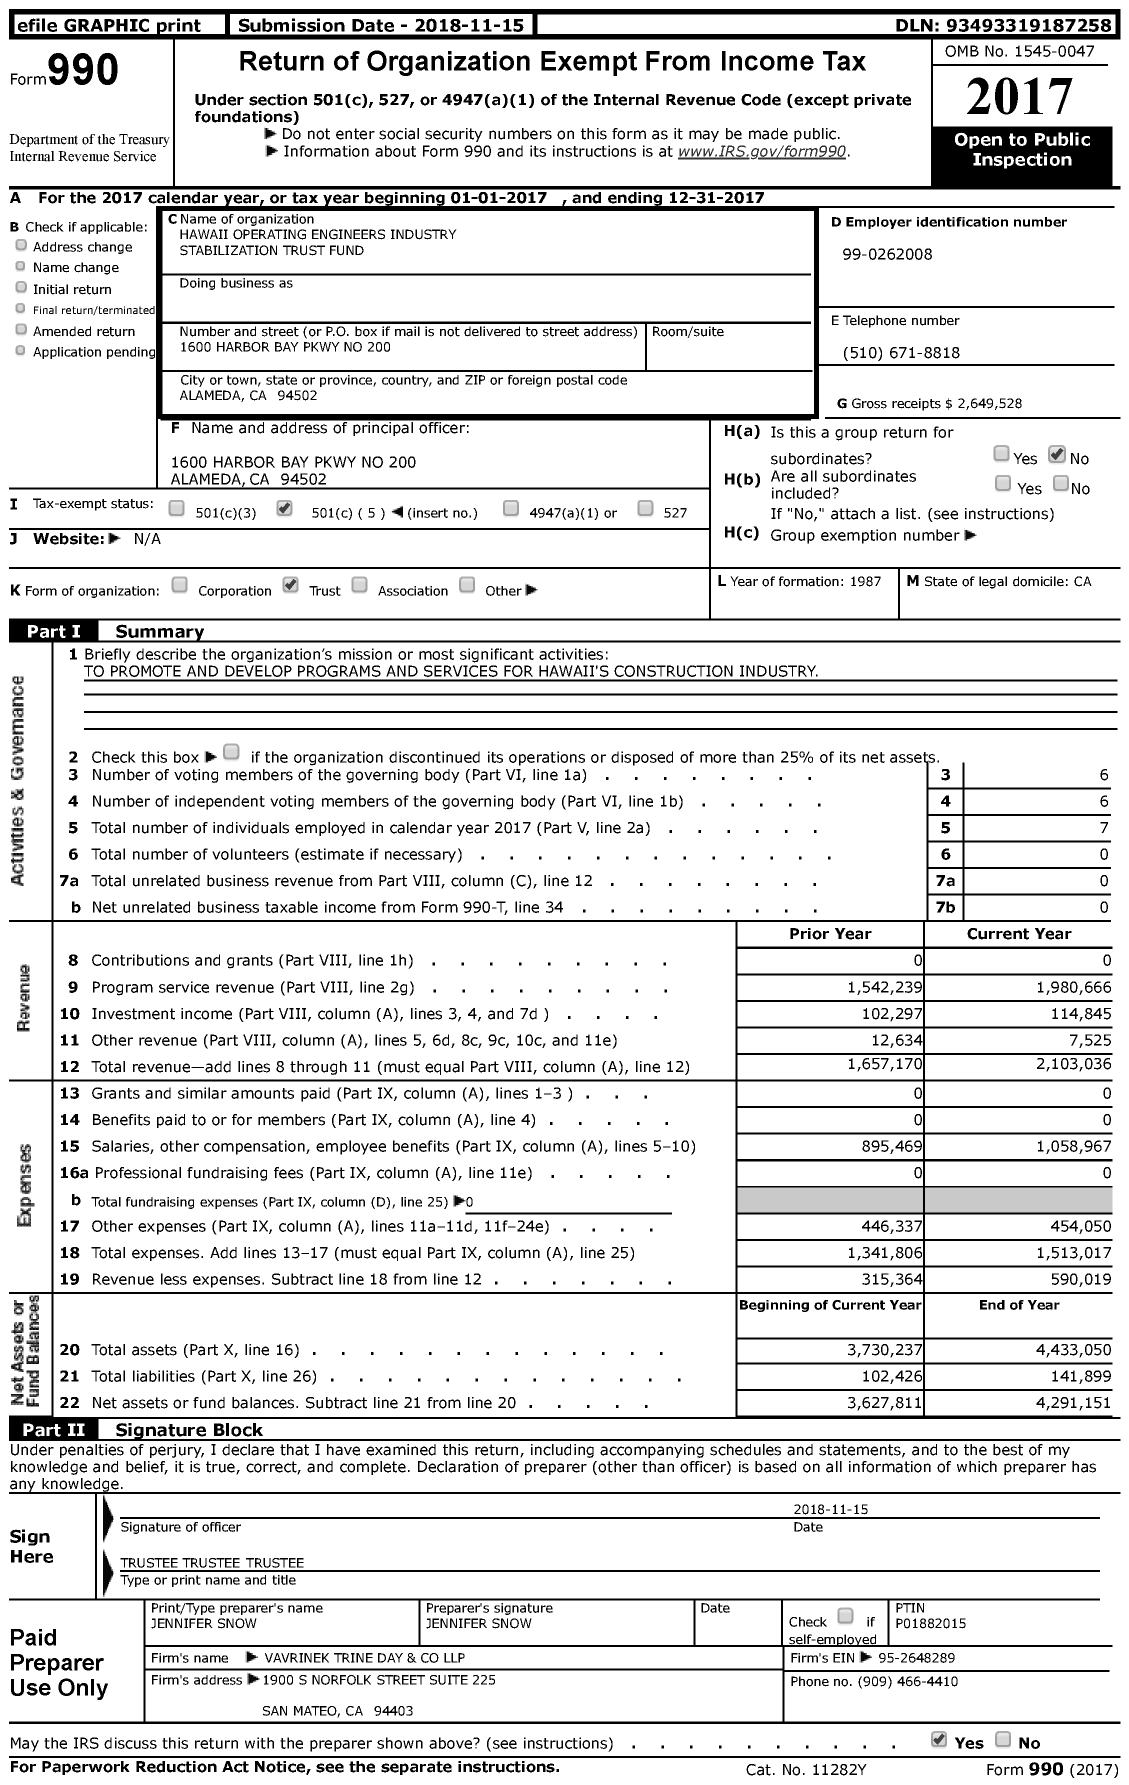 Image of first page of 2017 Form 990 for Hawaii Operating Engineers Industry Stabilization Stabilization Trust Fund